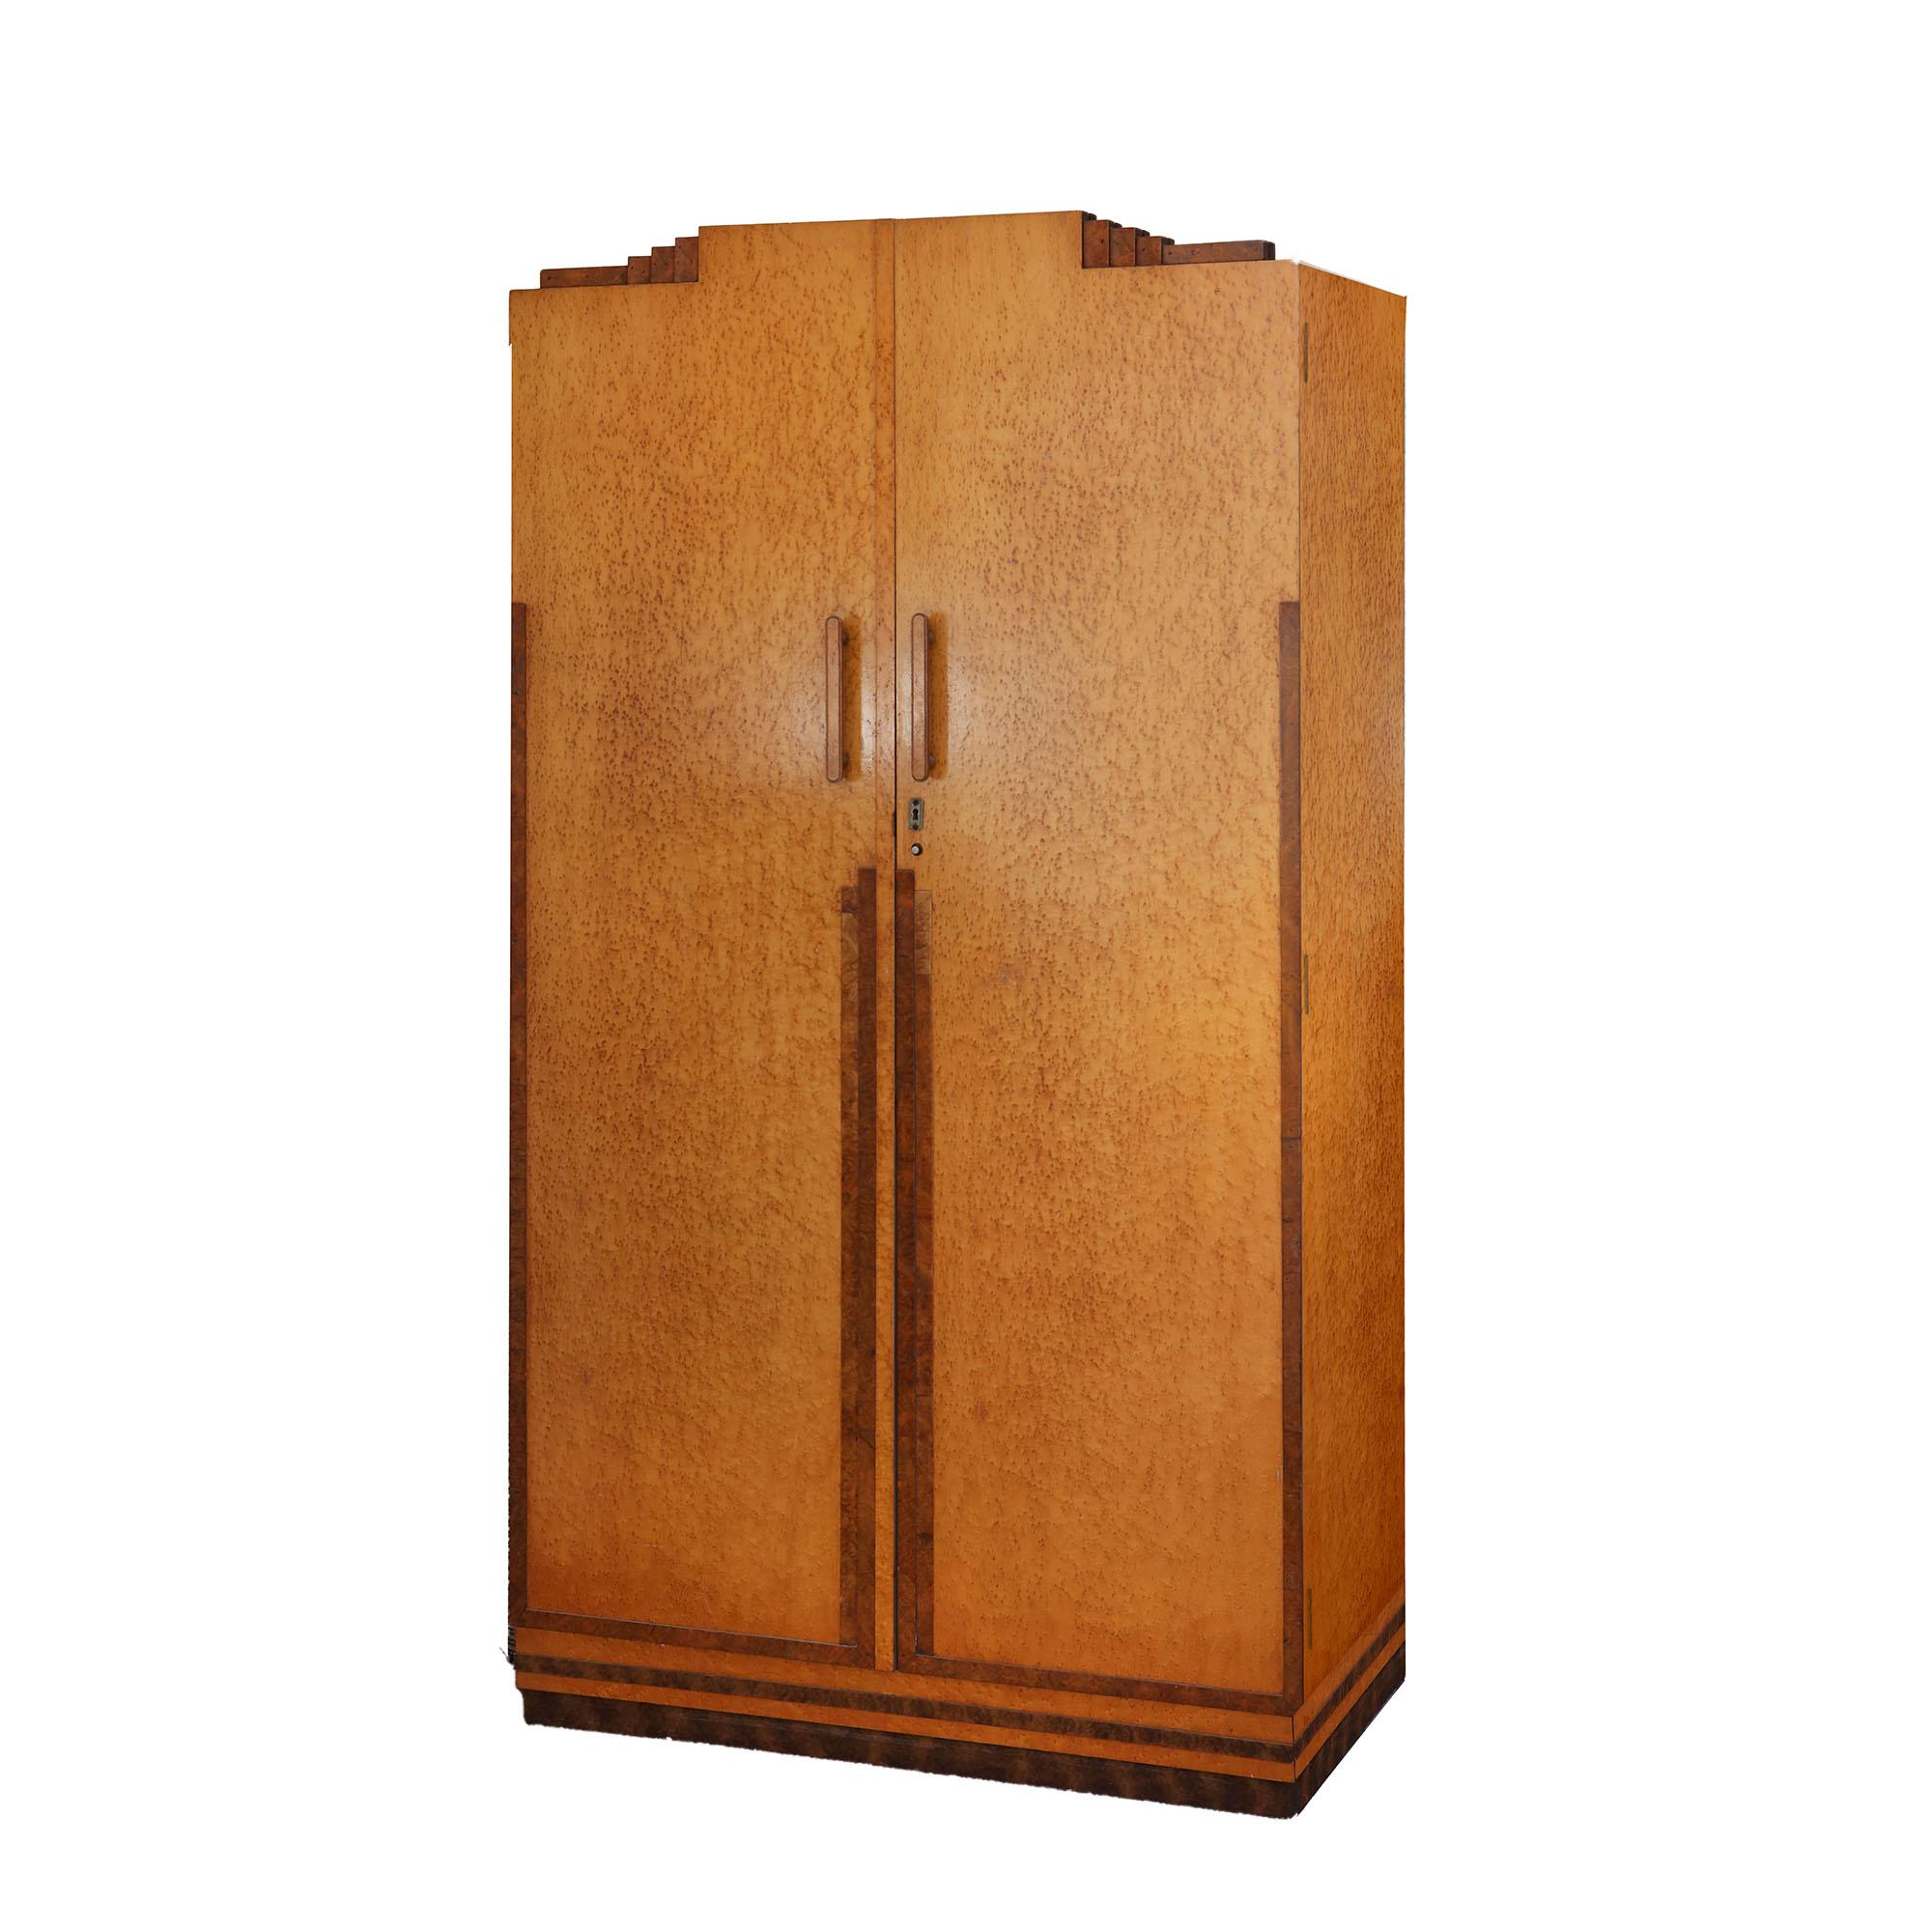 A fine set of midcentury Art Deco bedroom pieces including a large three-door wardrobe with internal hanging and shelves, a 2 door cabinet and dressing table with its original stool. 

All veneered in the finest bird's-eye maple

Wardrobe 1 H